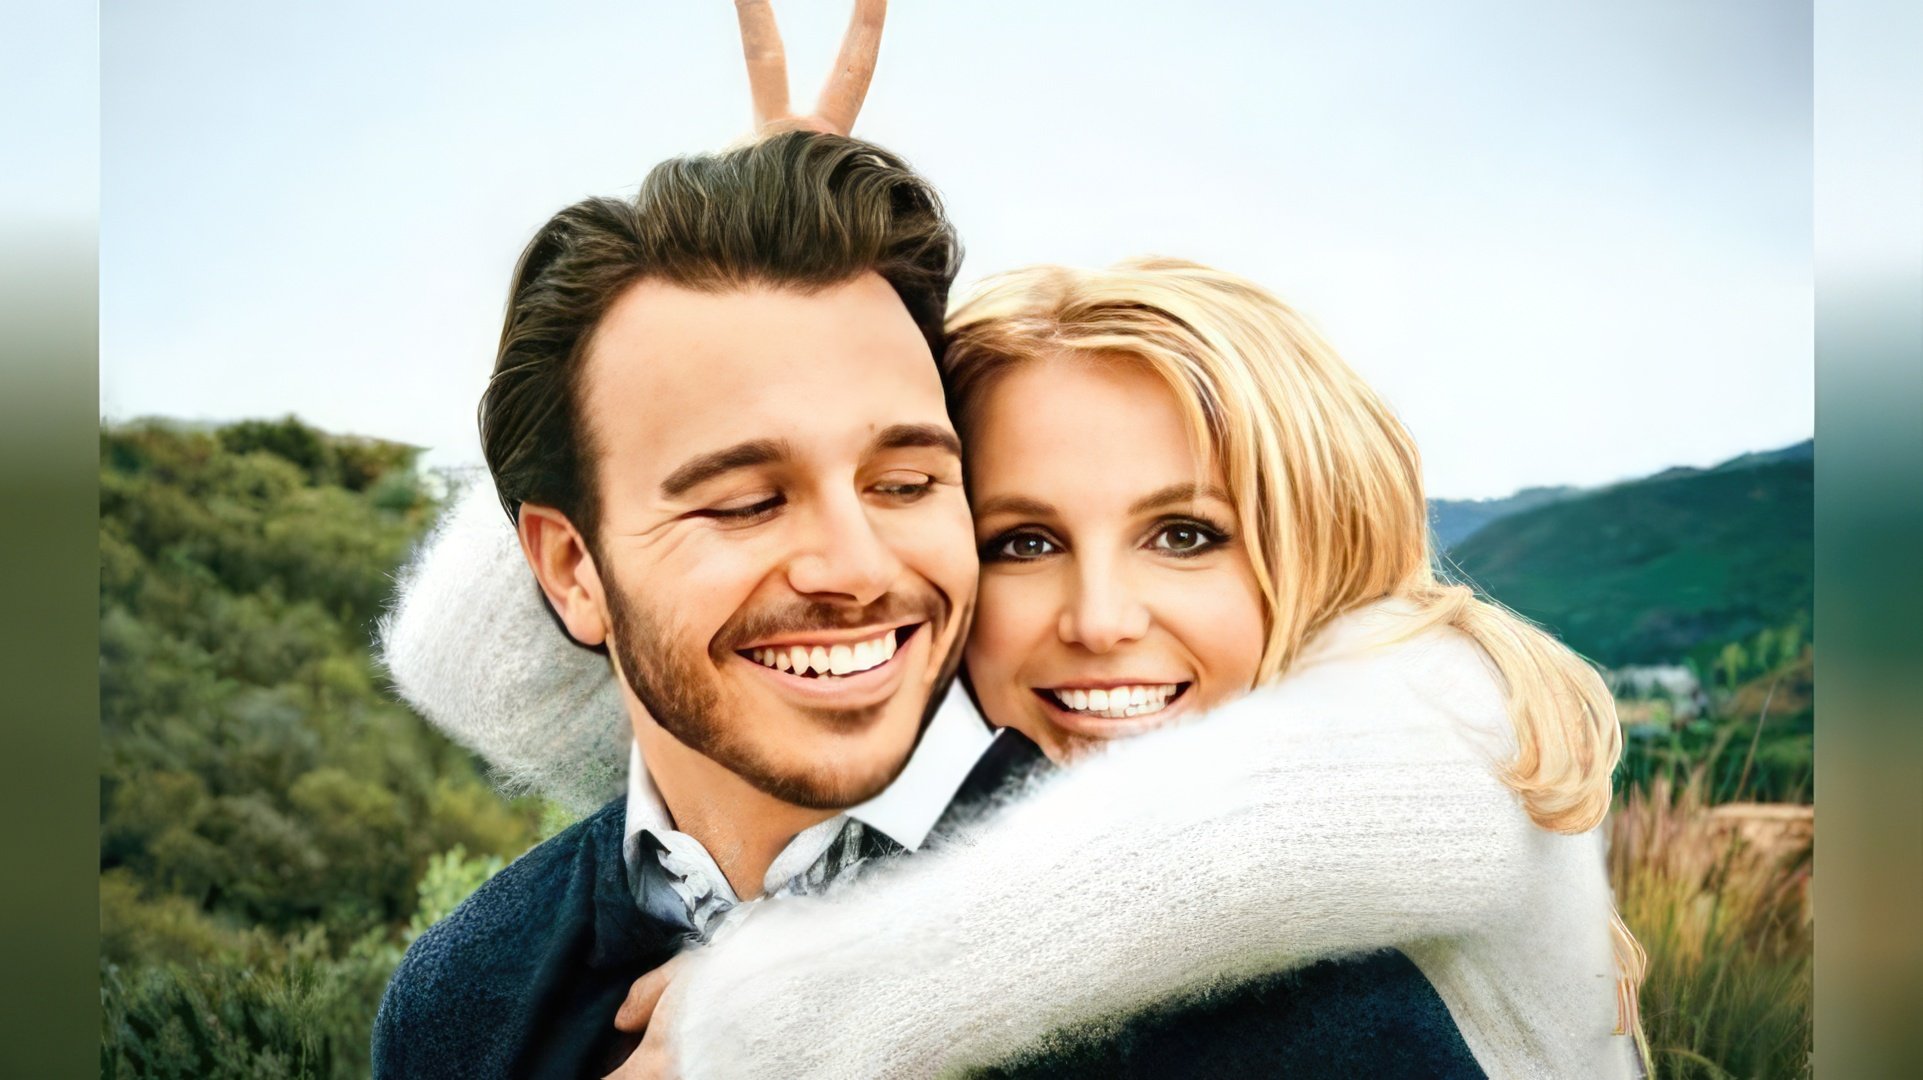 The relationship between Britney Spears and Charlie Ebersol also did not work out